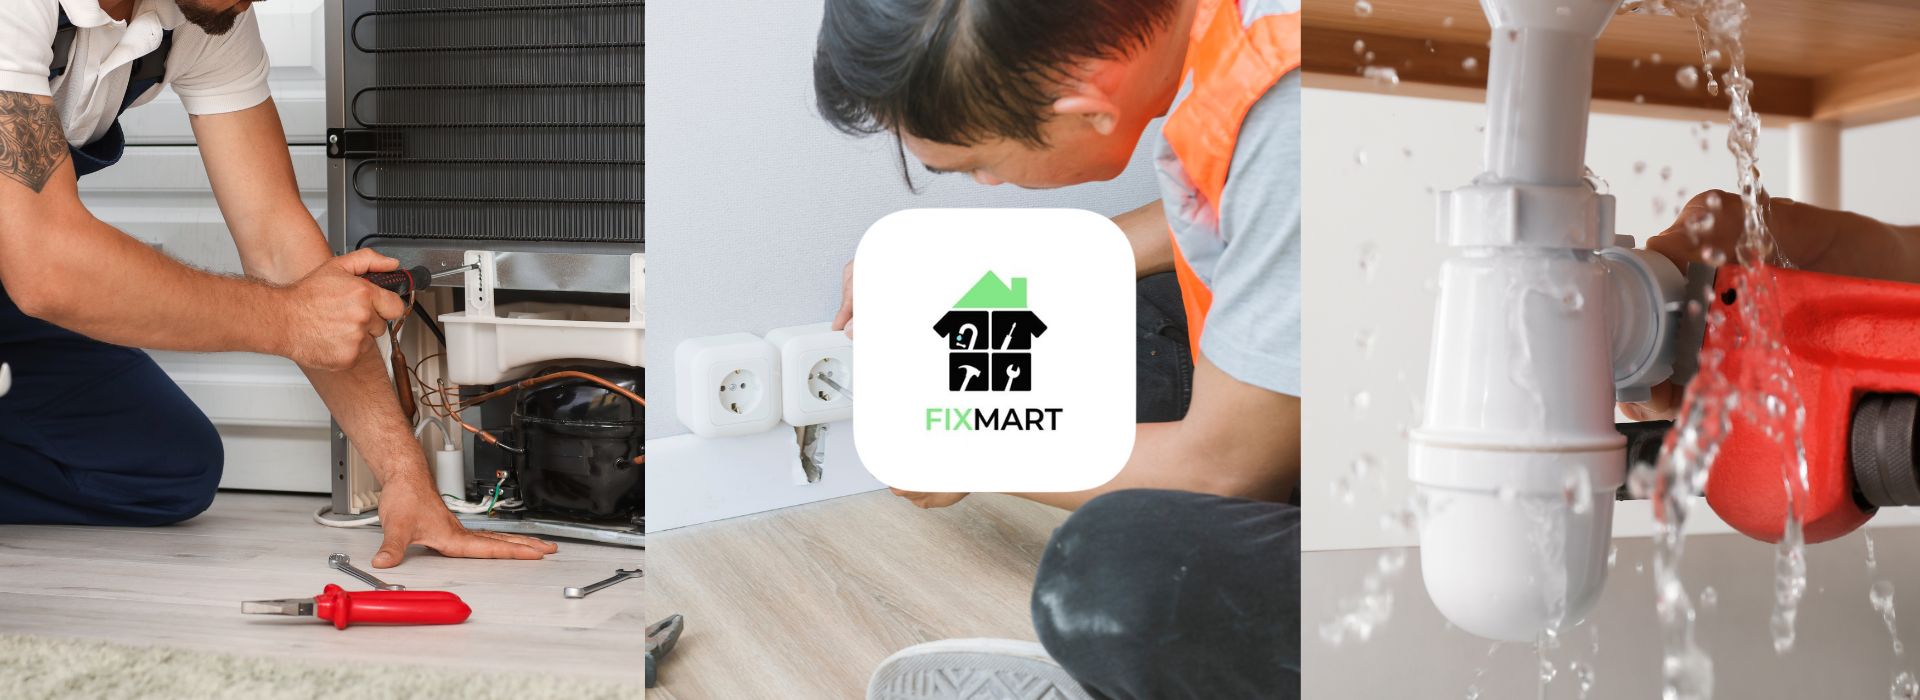 Making Singapore Home Tuition Easy: Use FixMart for Success